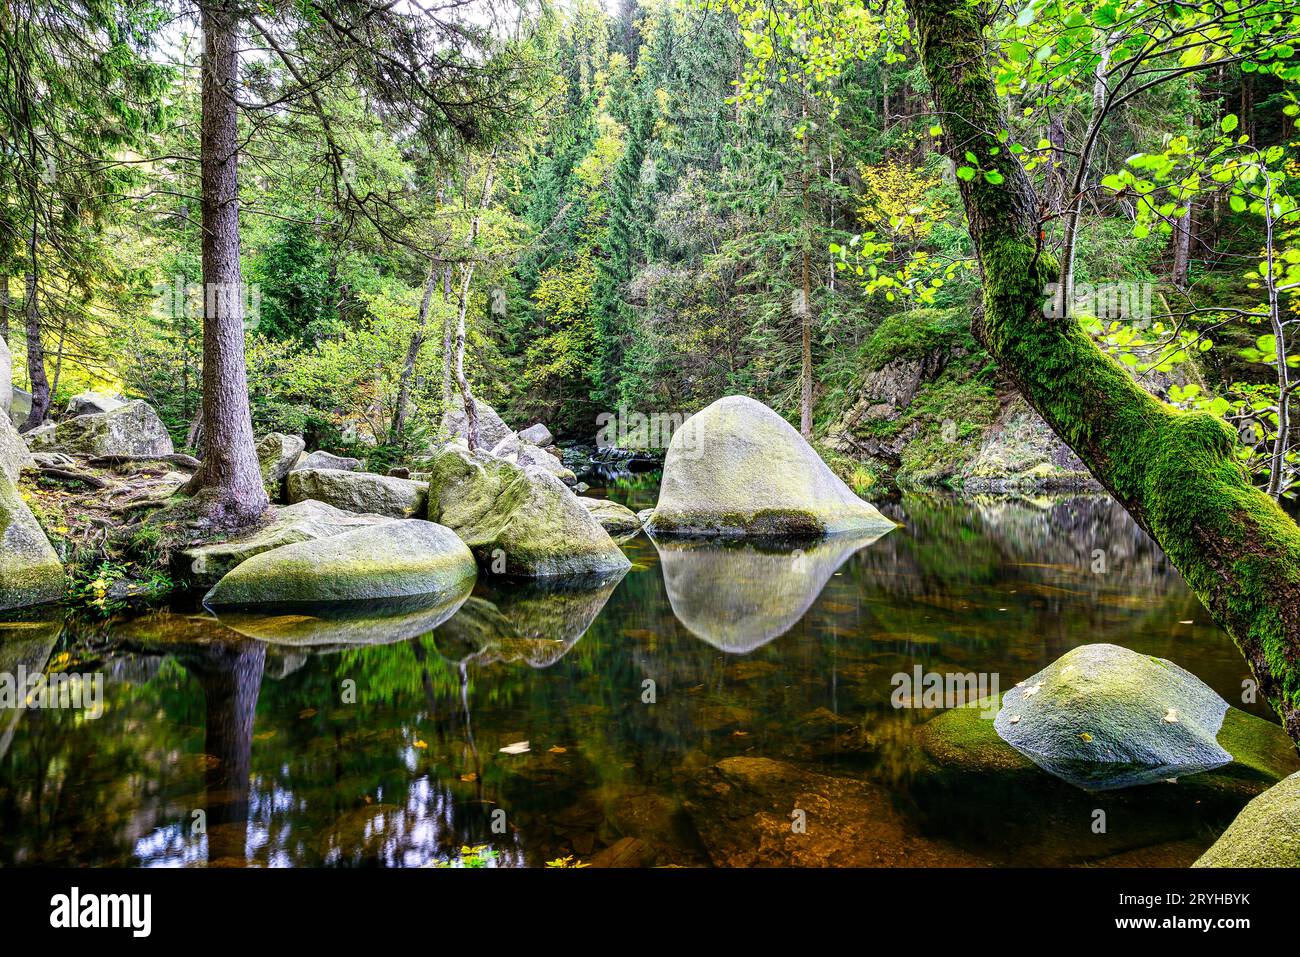 Peaceful scene with large stones in the river bed of the Engagement island in the Oker Stock Photo